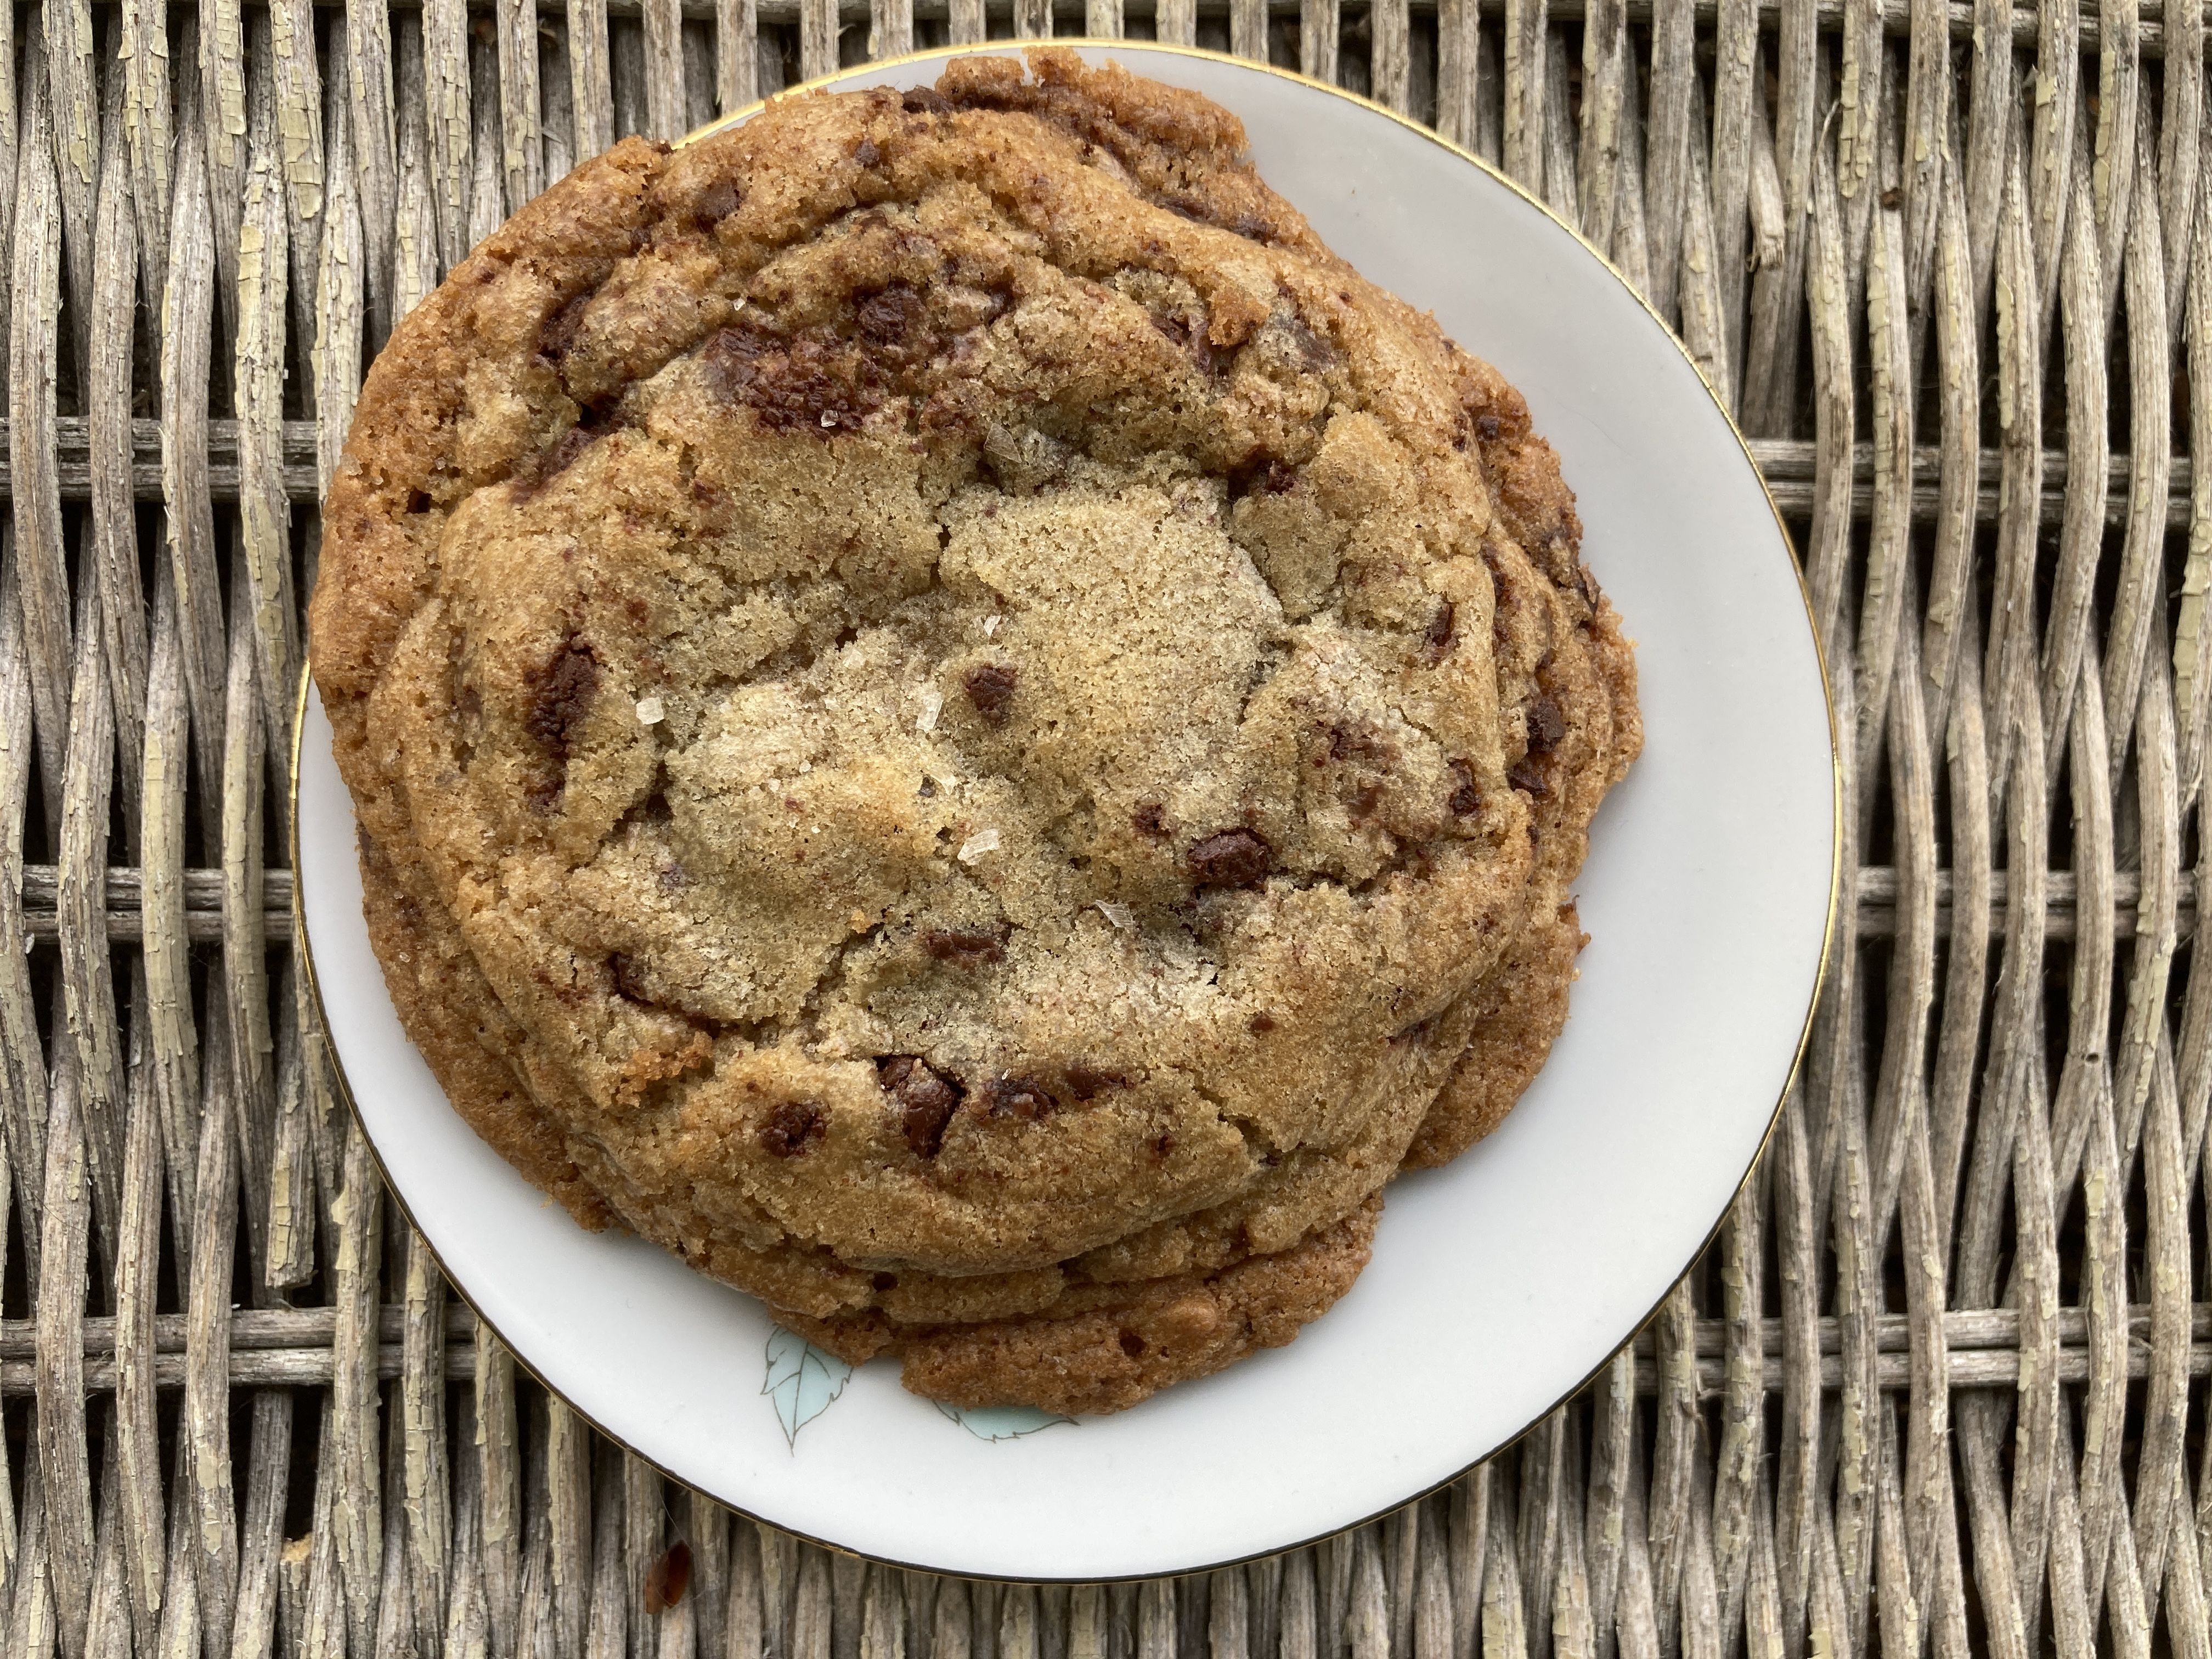 Taken from above; the top of a thick and nubbly chocolate chip cookie, on a small white plate on a wicker table.